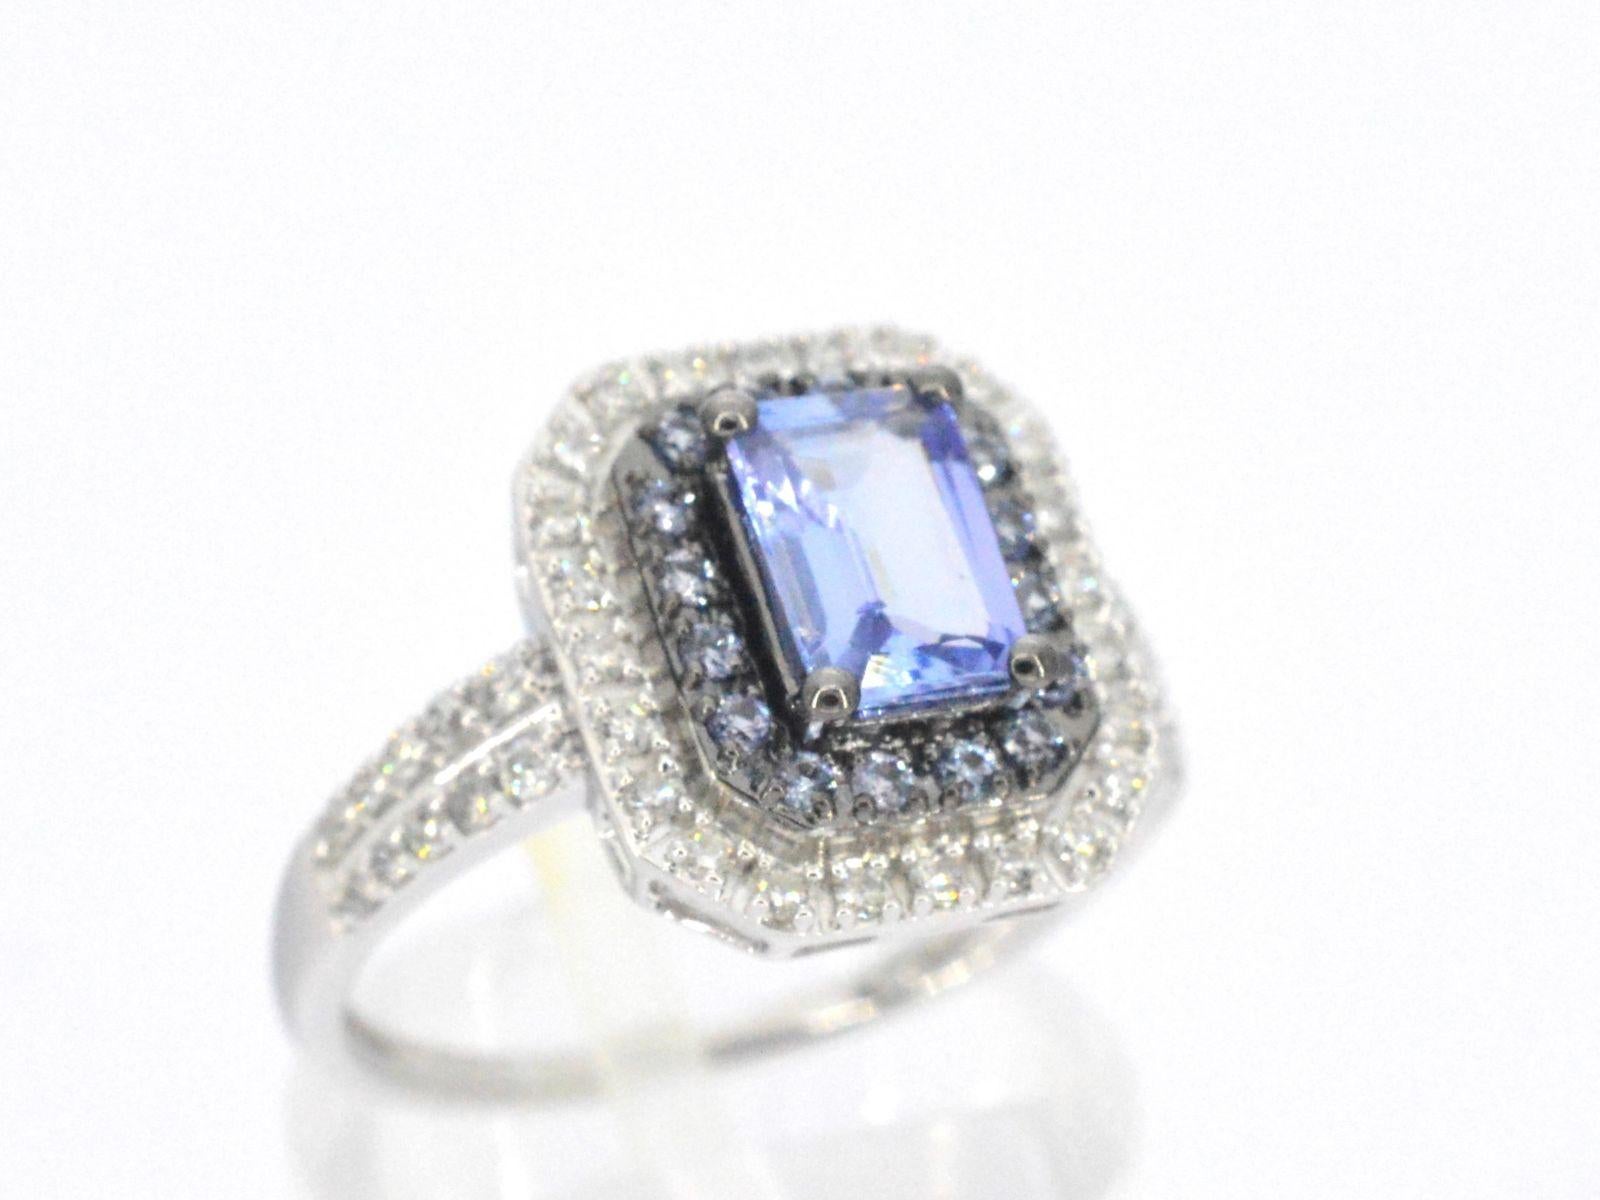 This unique white gold ring is a one-of-a-kind piece of jewelry that features dazzling diamonds and a beautiful tanzanite gemstone. The diamonds are expertly set in the white gold band to create a seamless and elegant look that catches the light